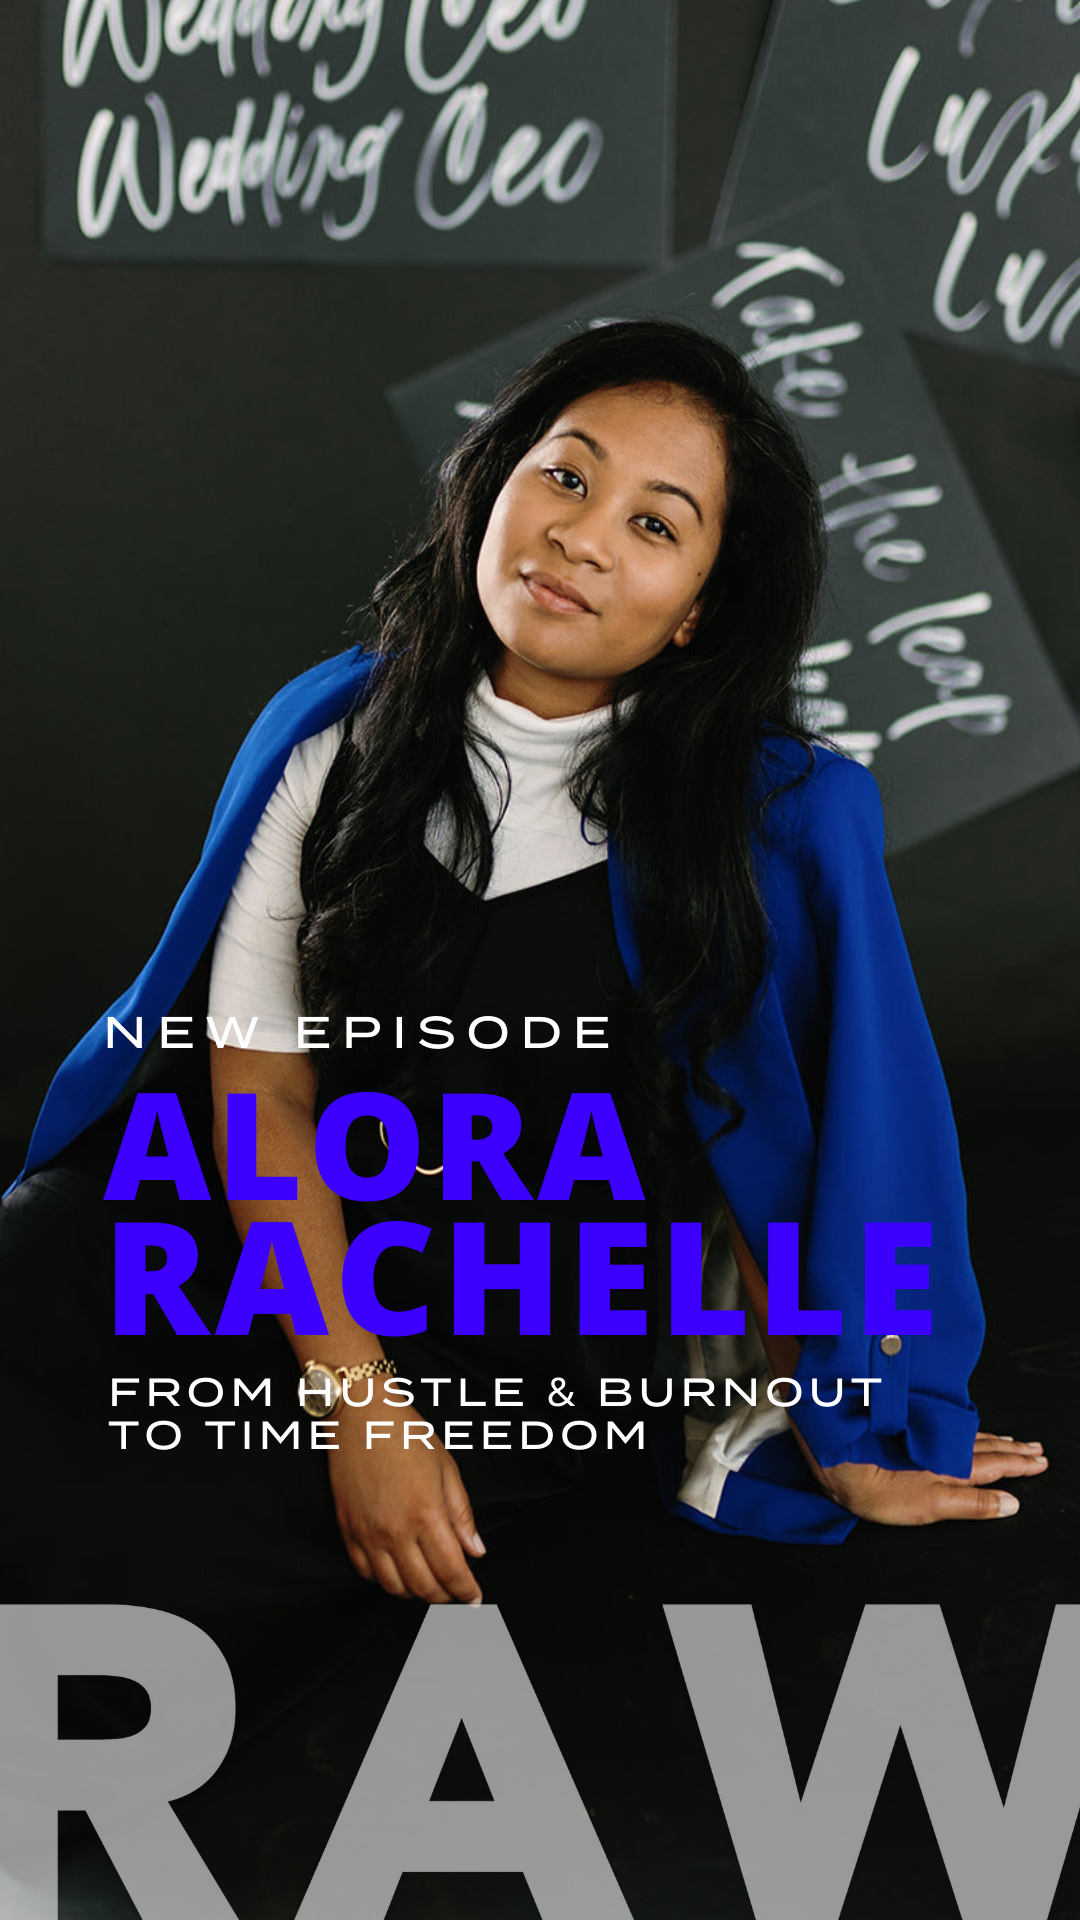 Alora Rachelle New Episode on RAW with the Landlocked Mermaid Podcast From Hustle & Burnout to Time Freedom